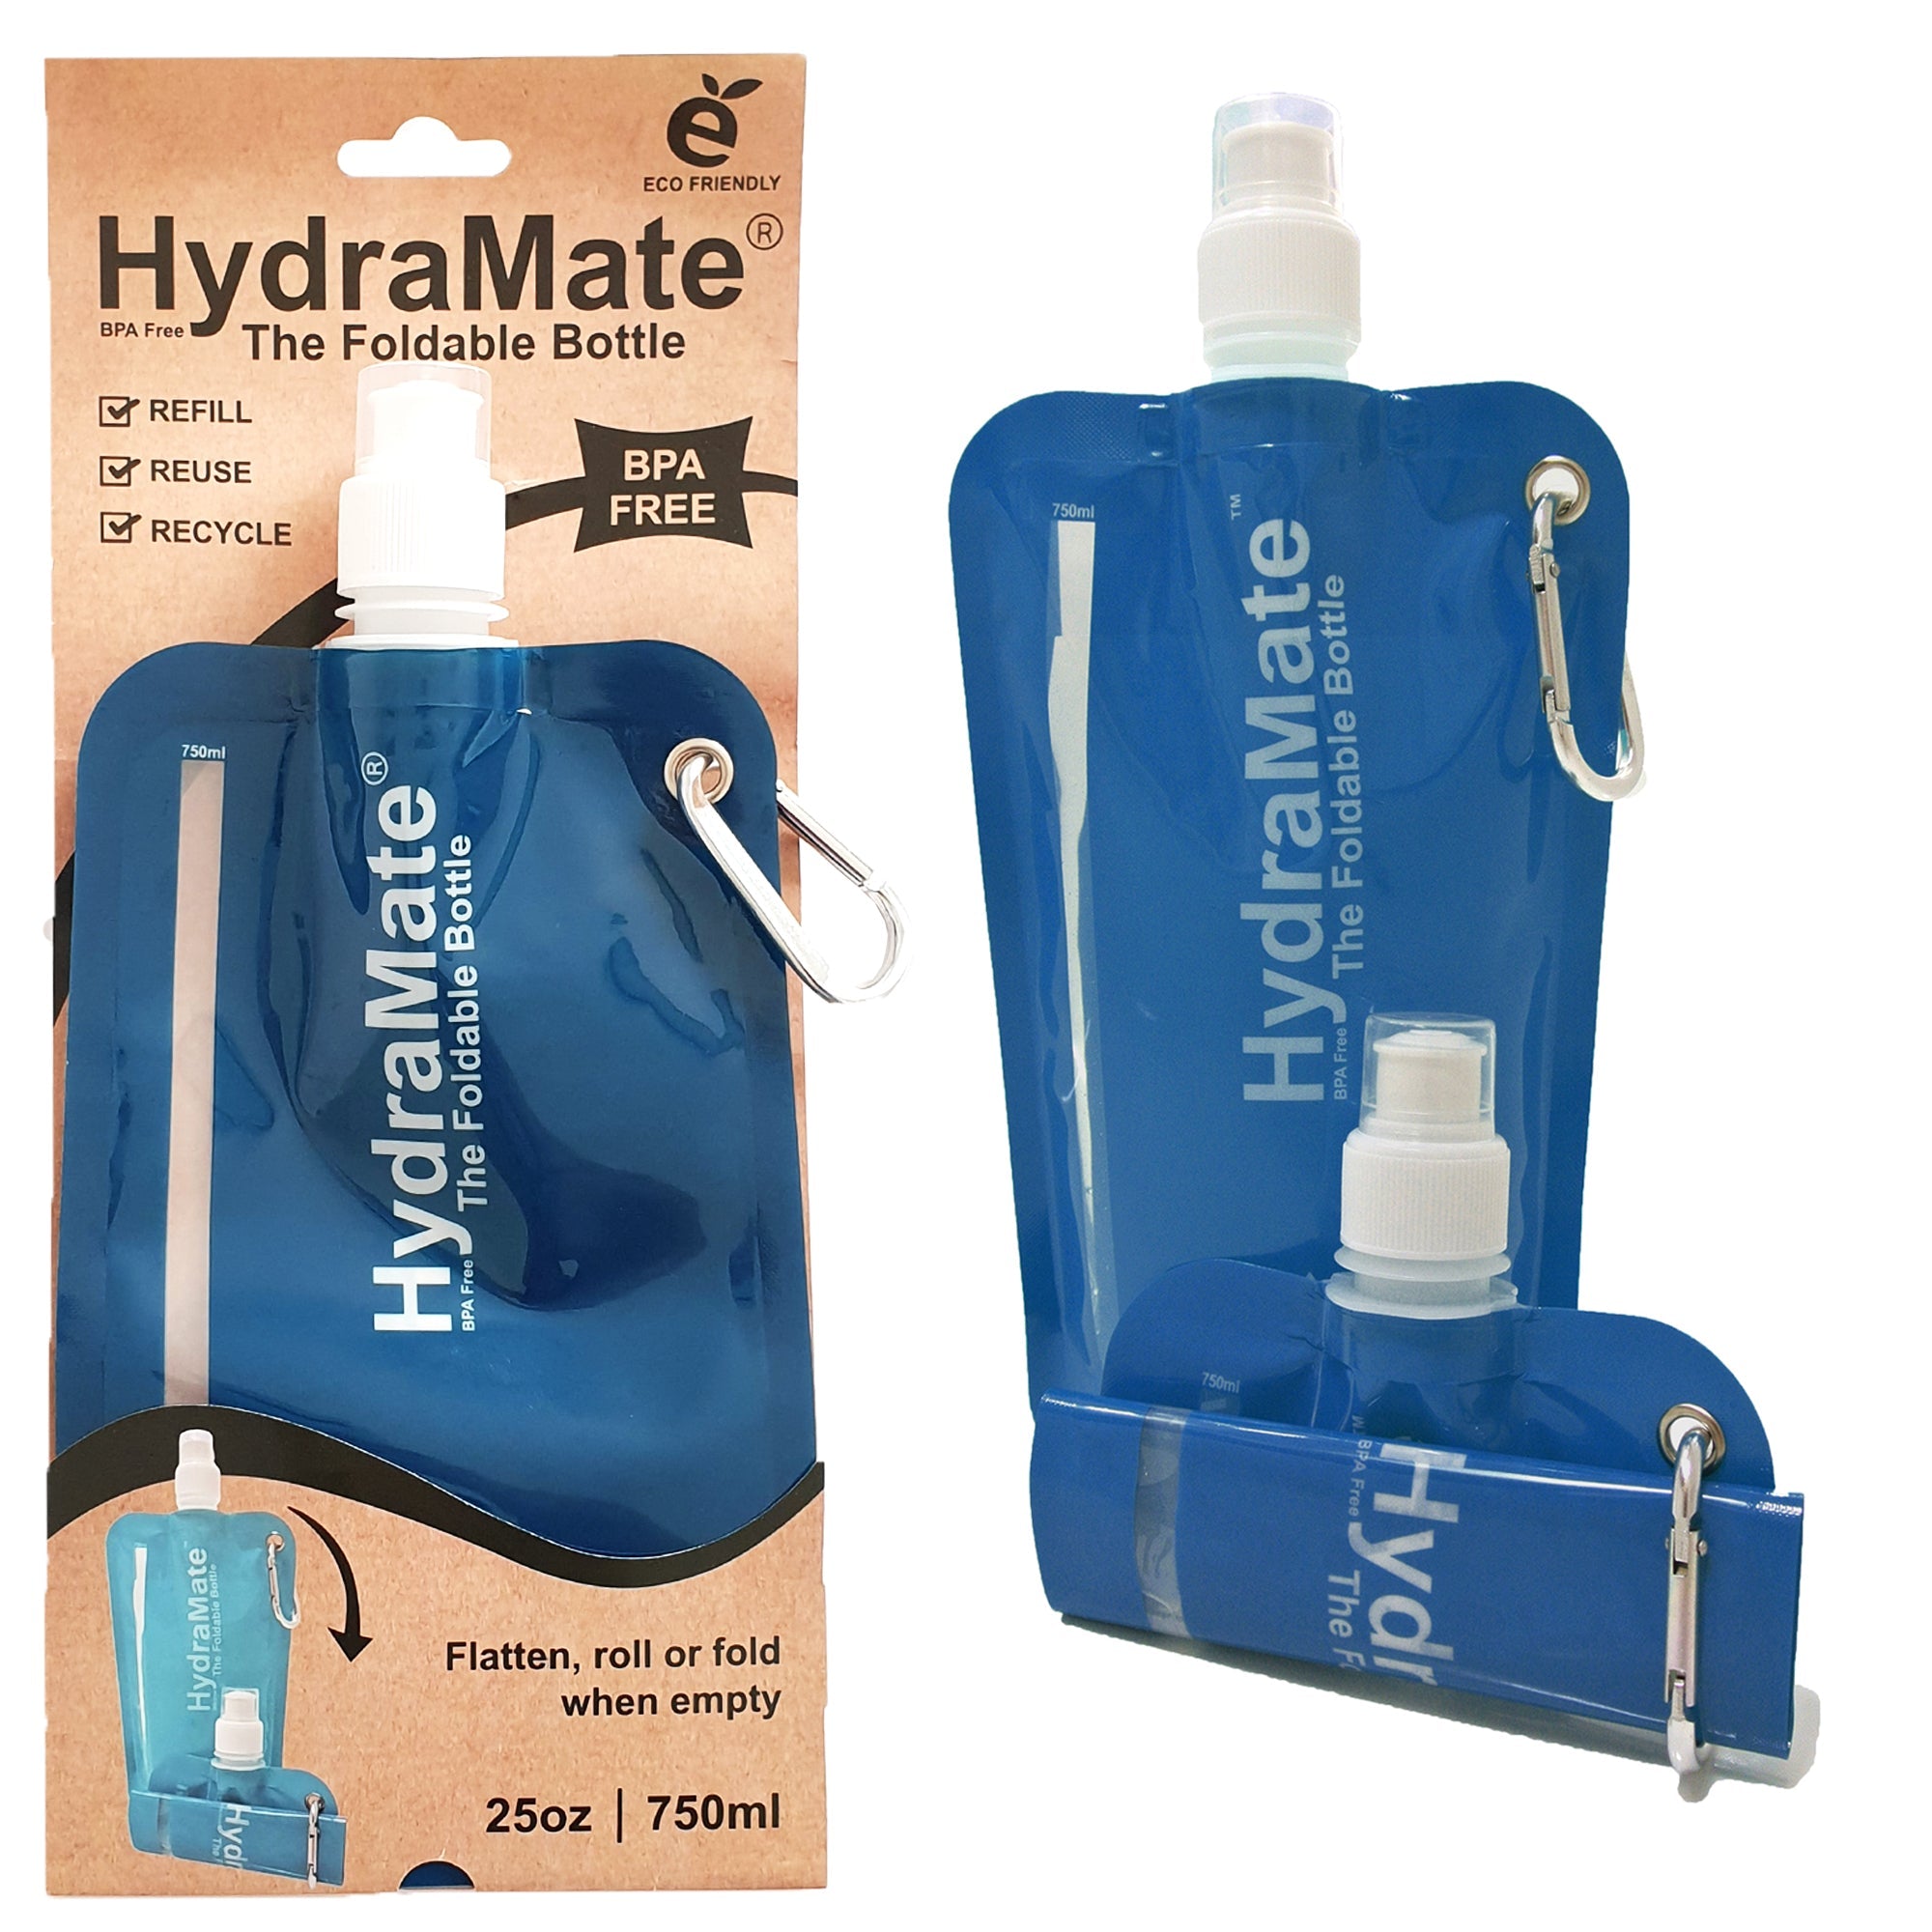 HydraMate Foldable Bottle. Collapsible Water Bottle 750ml